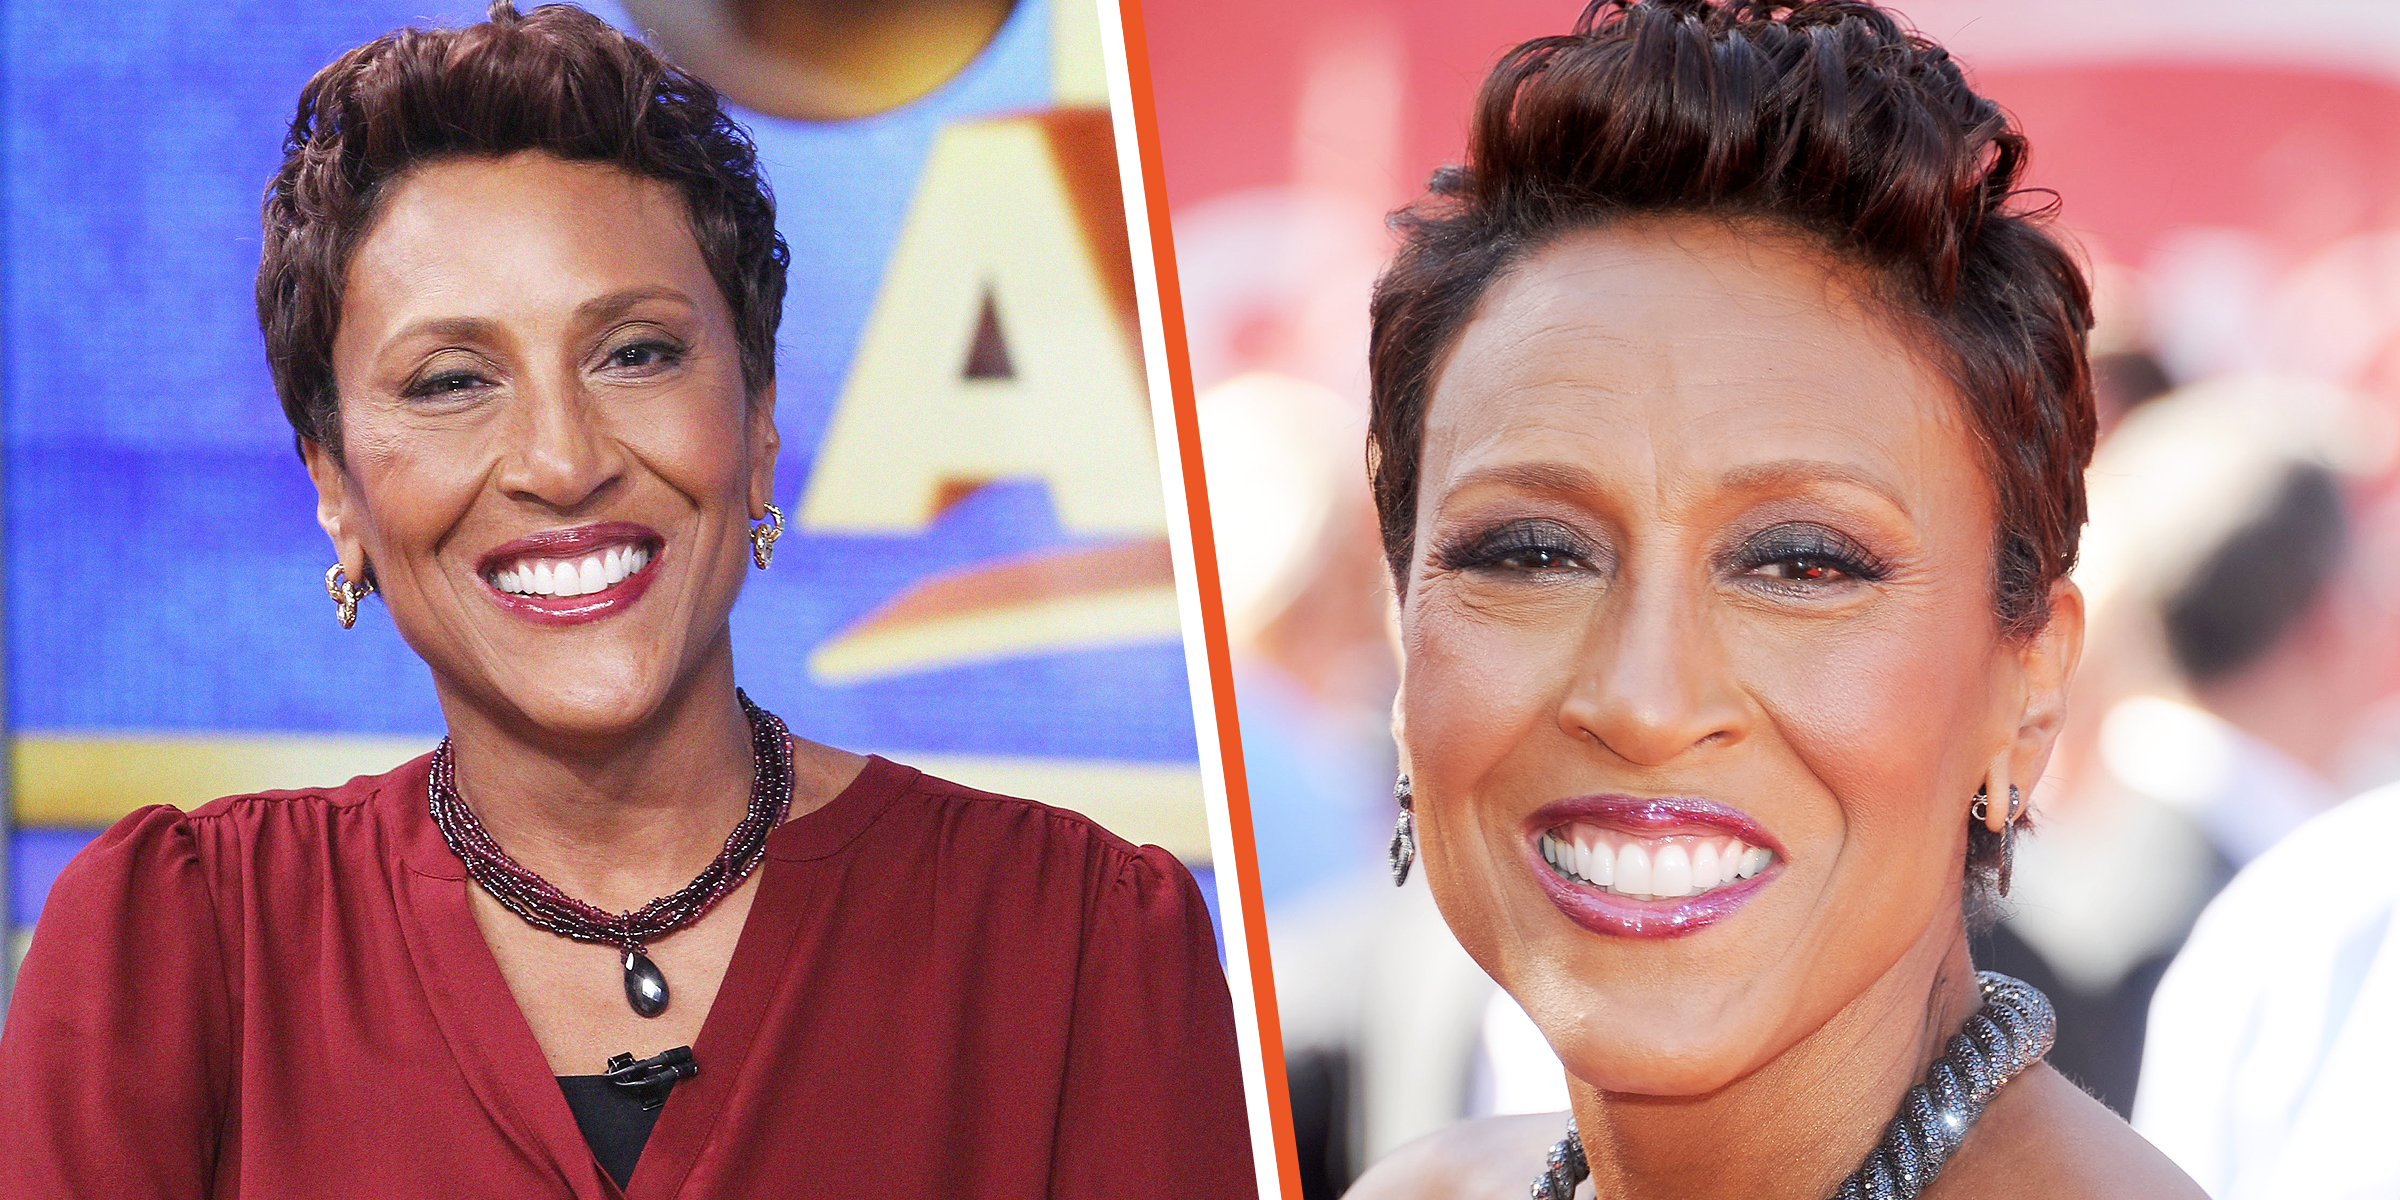 Robin Roberts | Robin Roberts holding her wife's hand. | Sources: Getty Images | Instagram/mdhord